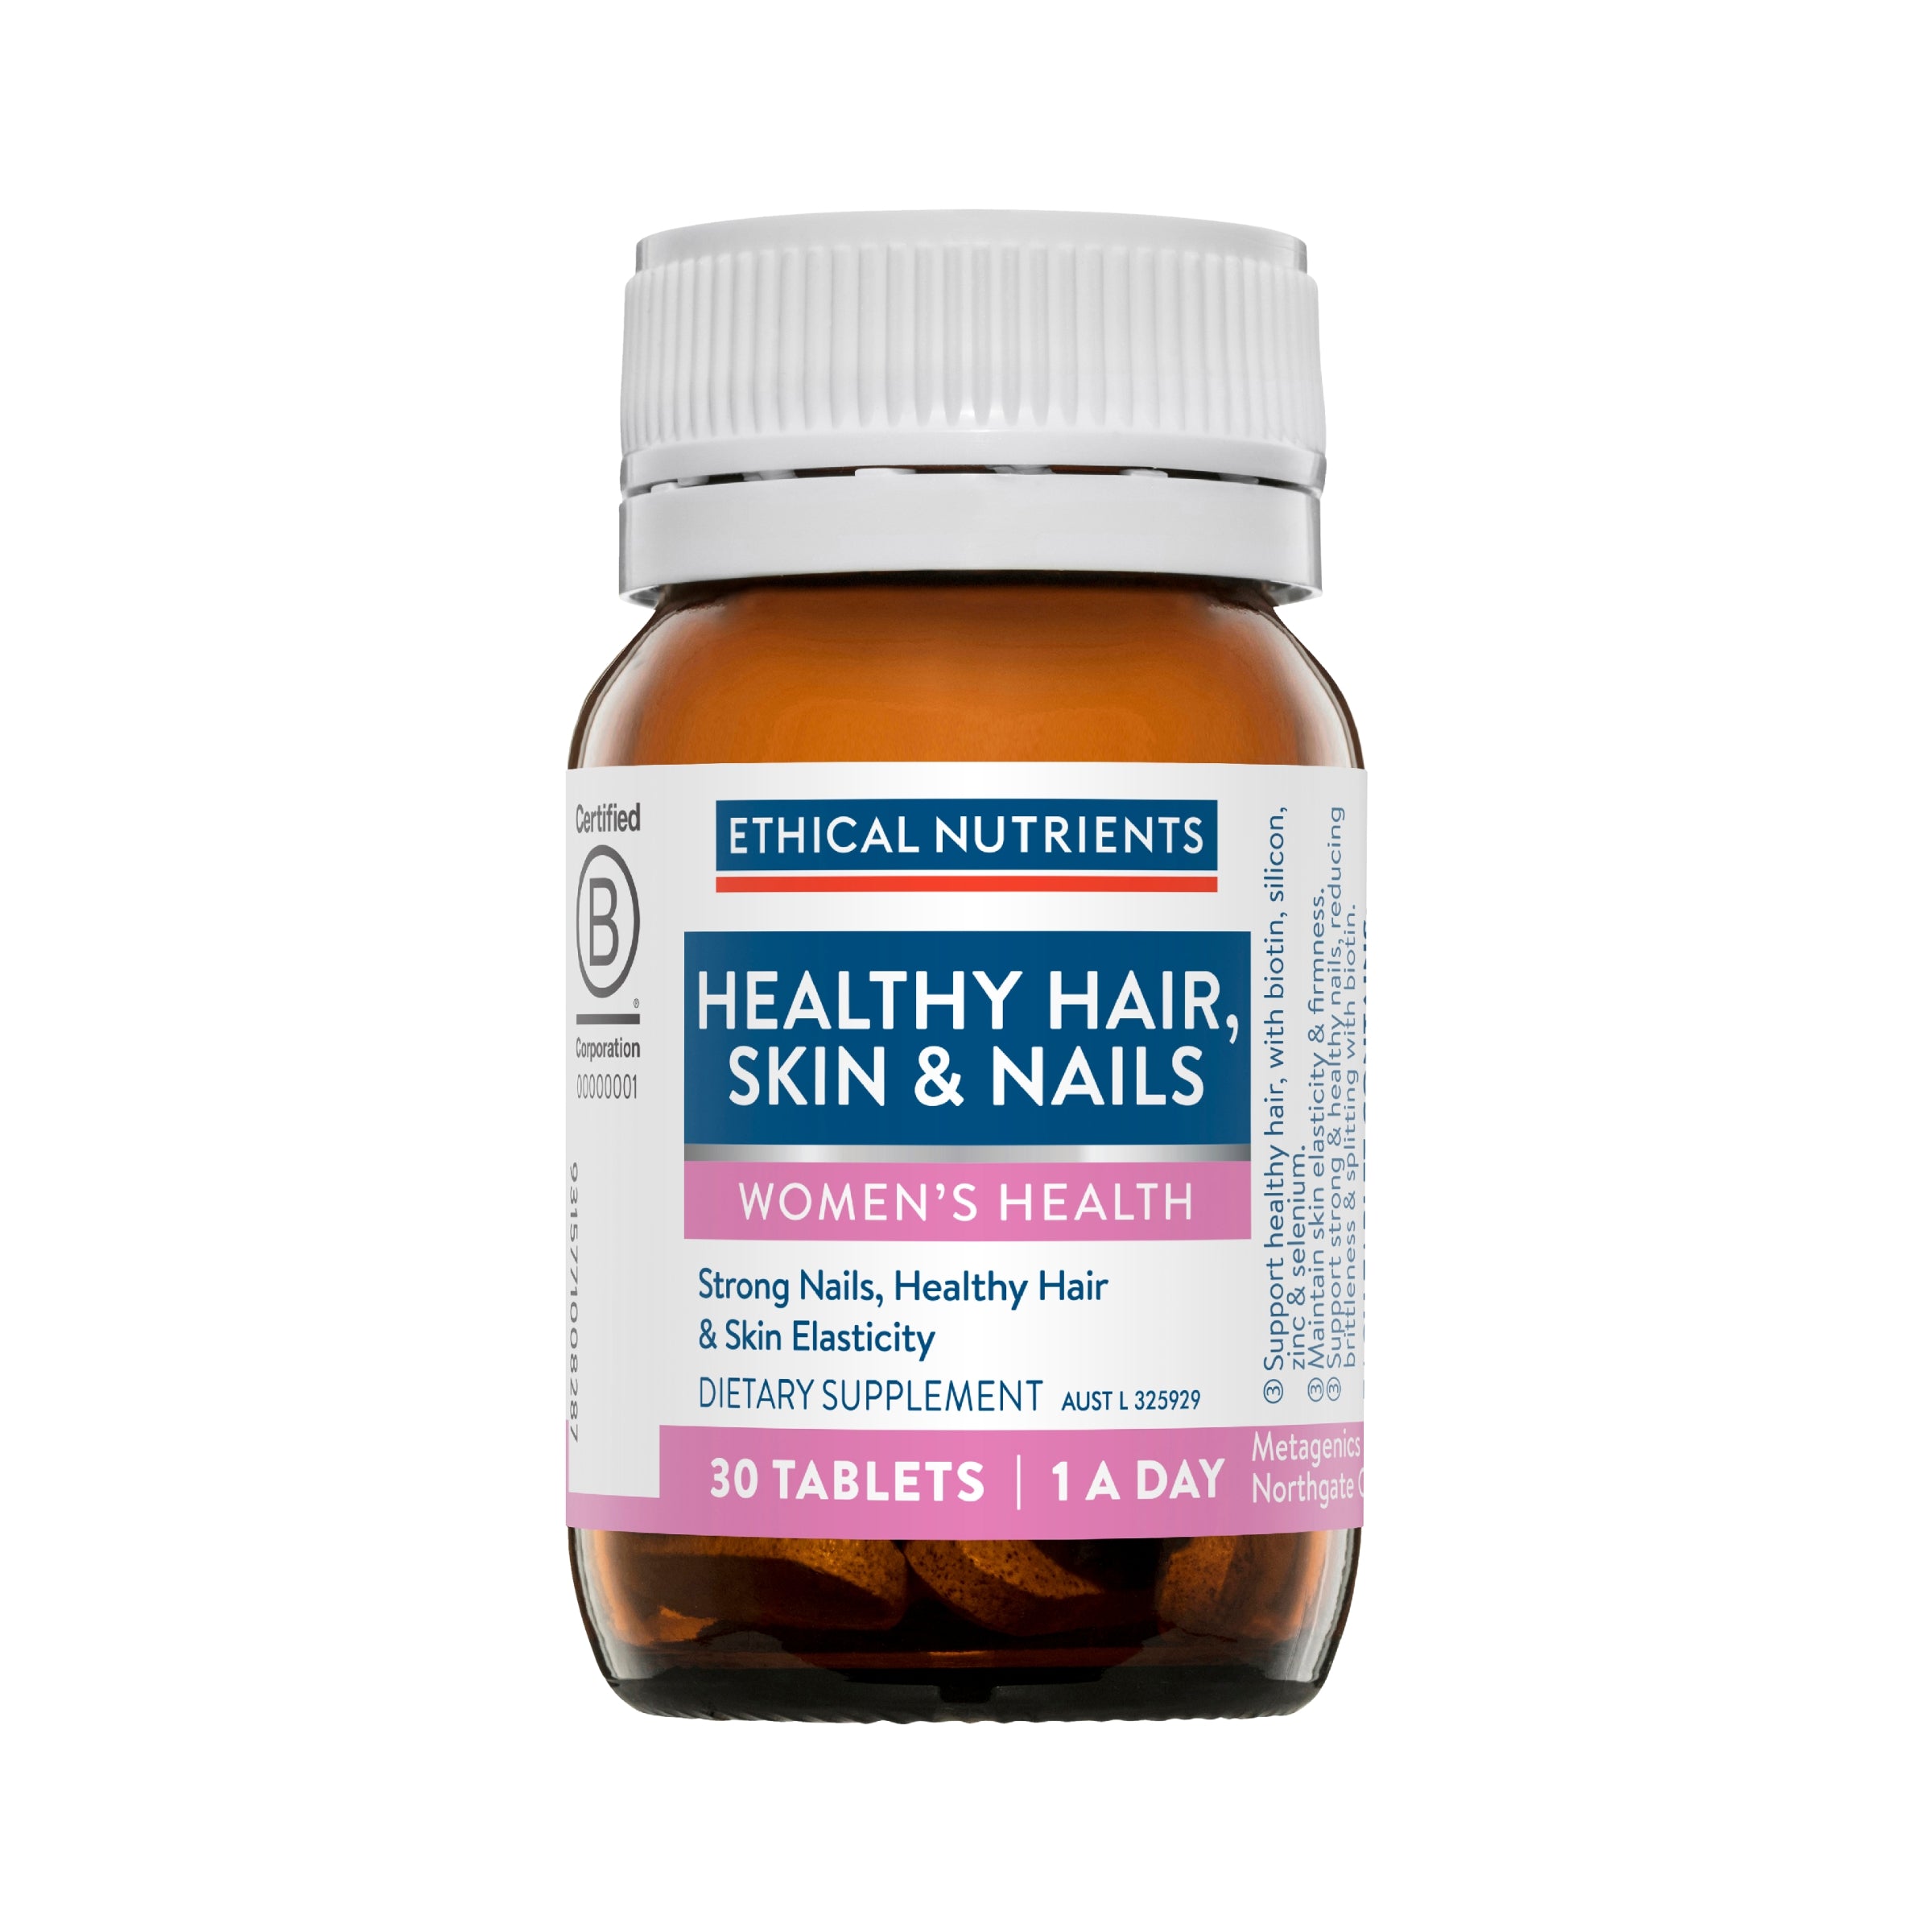 Ethical Nutrients Healthy Hair, Skin & Nails 30 Tablets #size_30 tablets